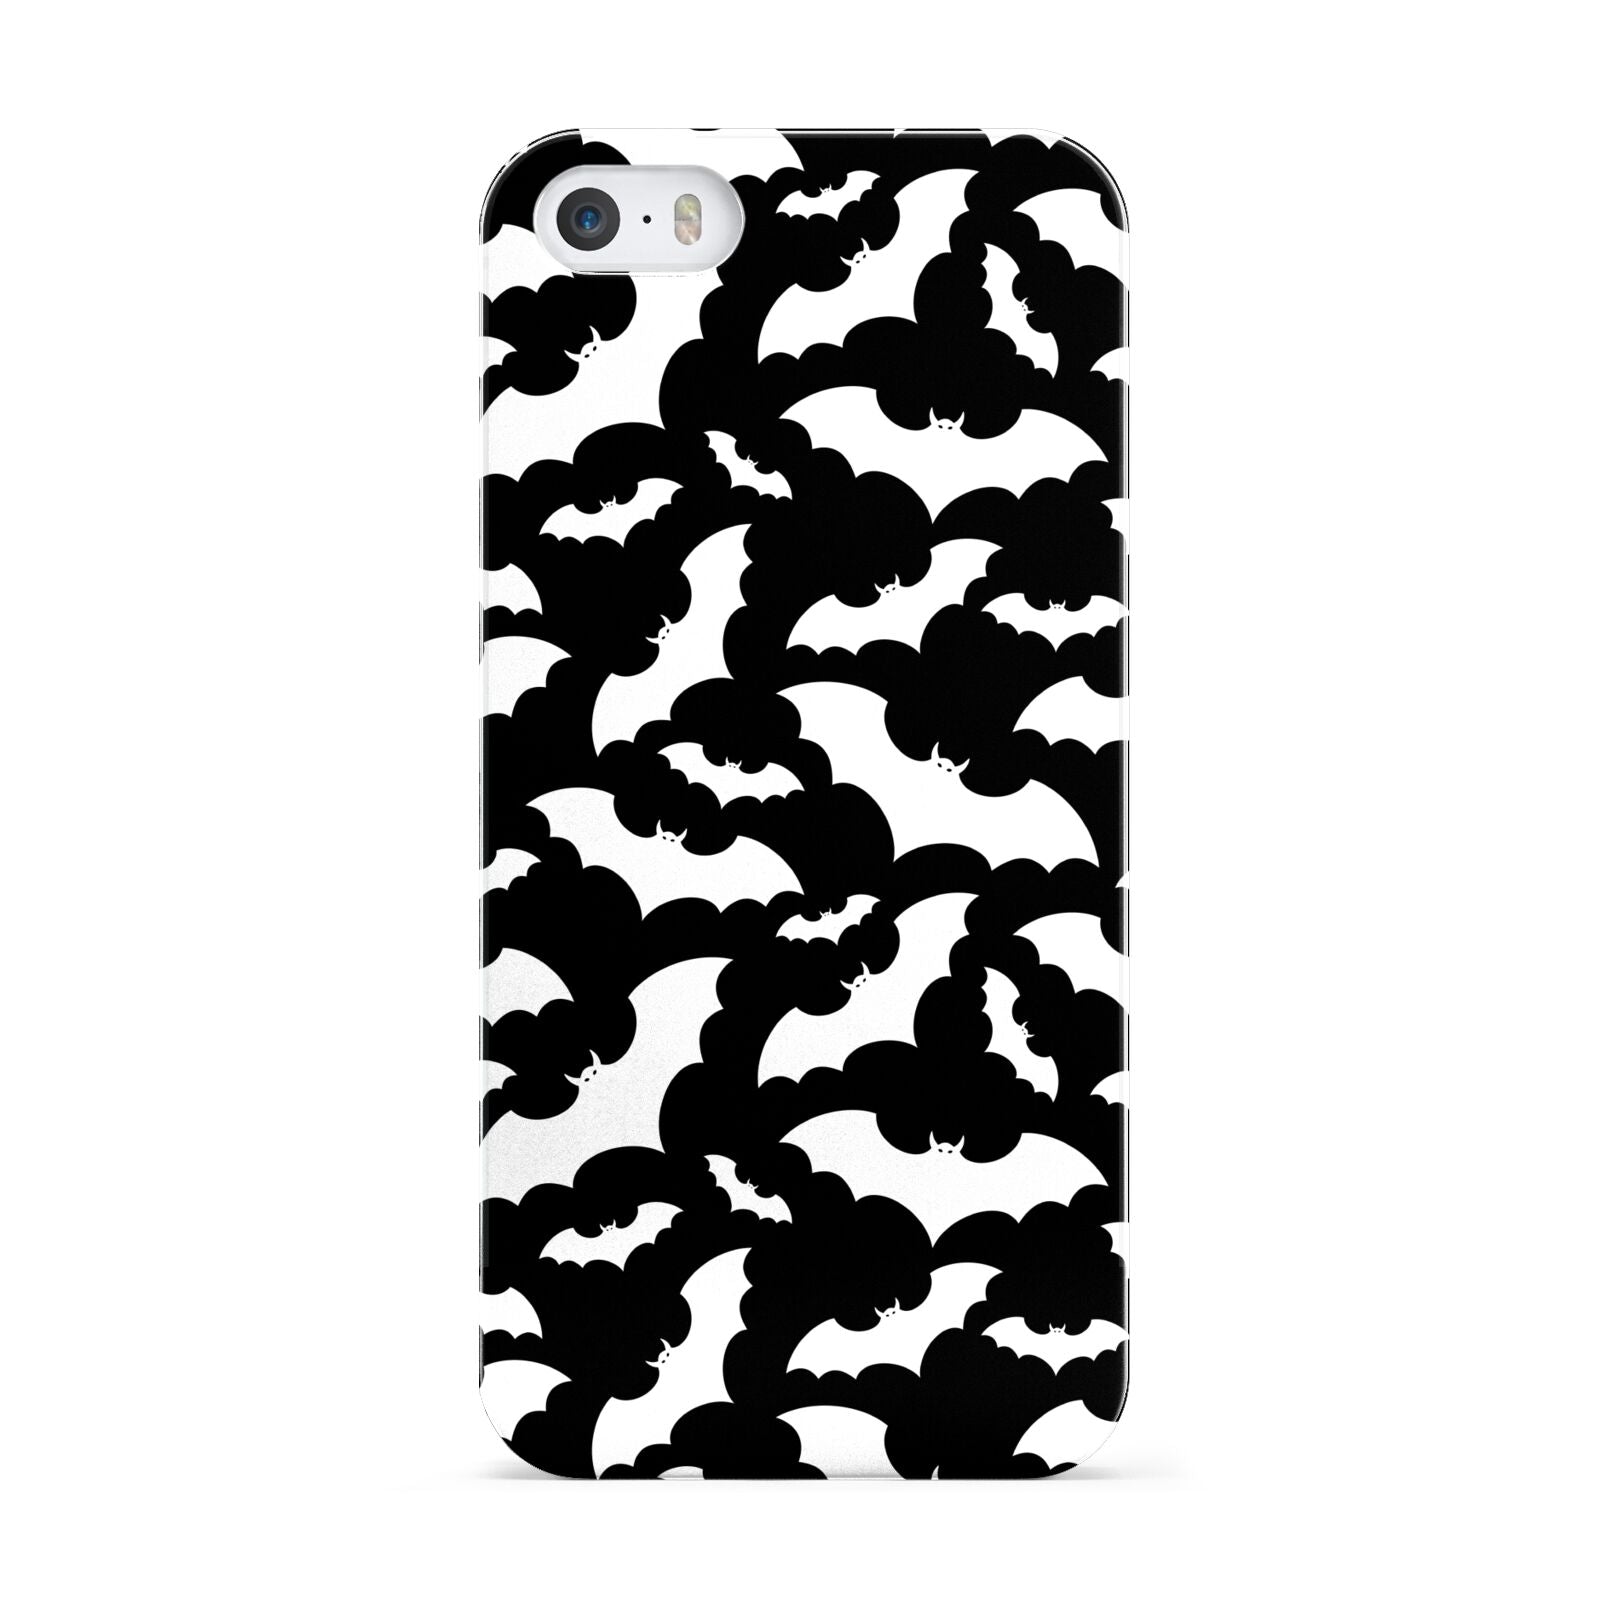 Black and White Bats Apple iPhone 5 Case